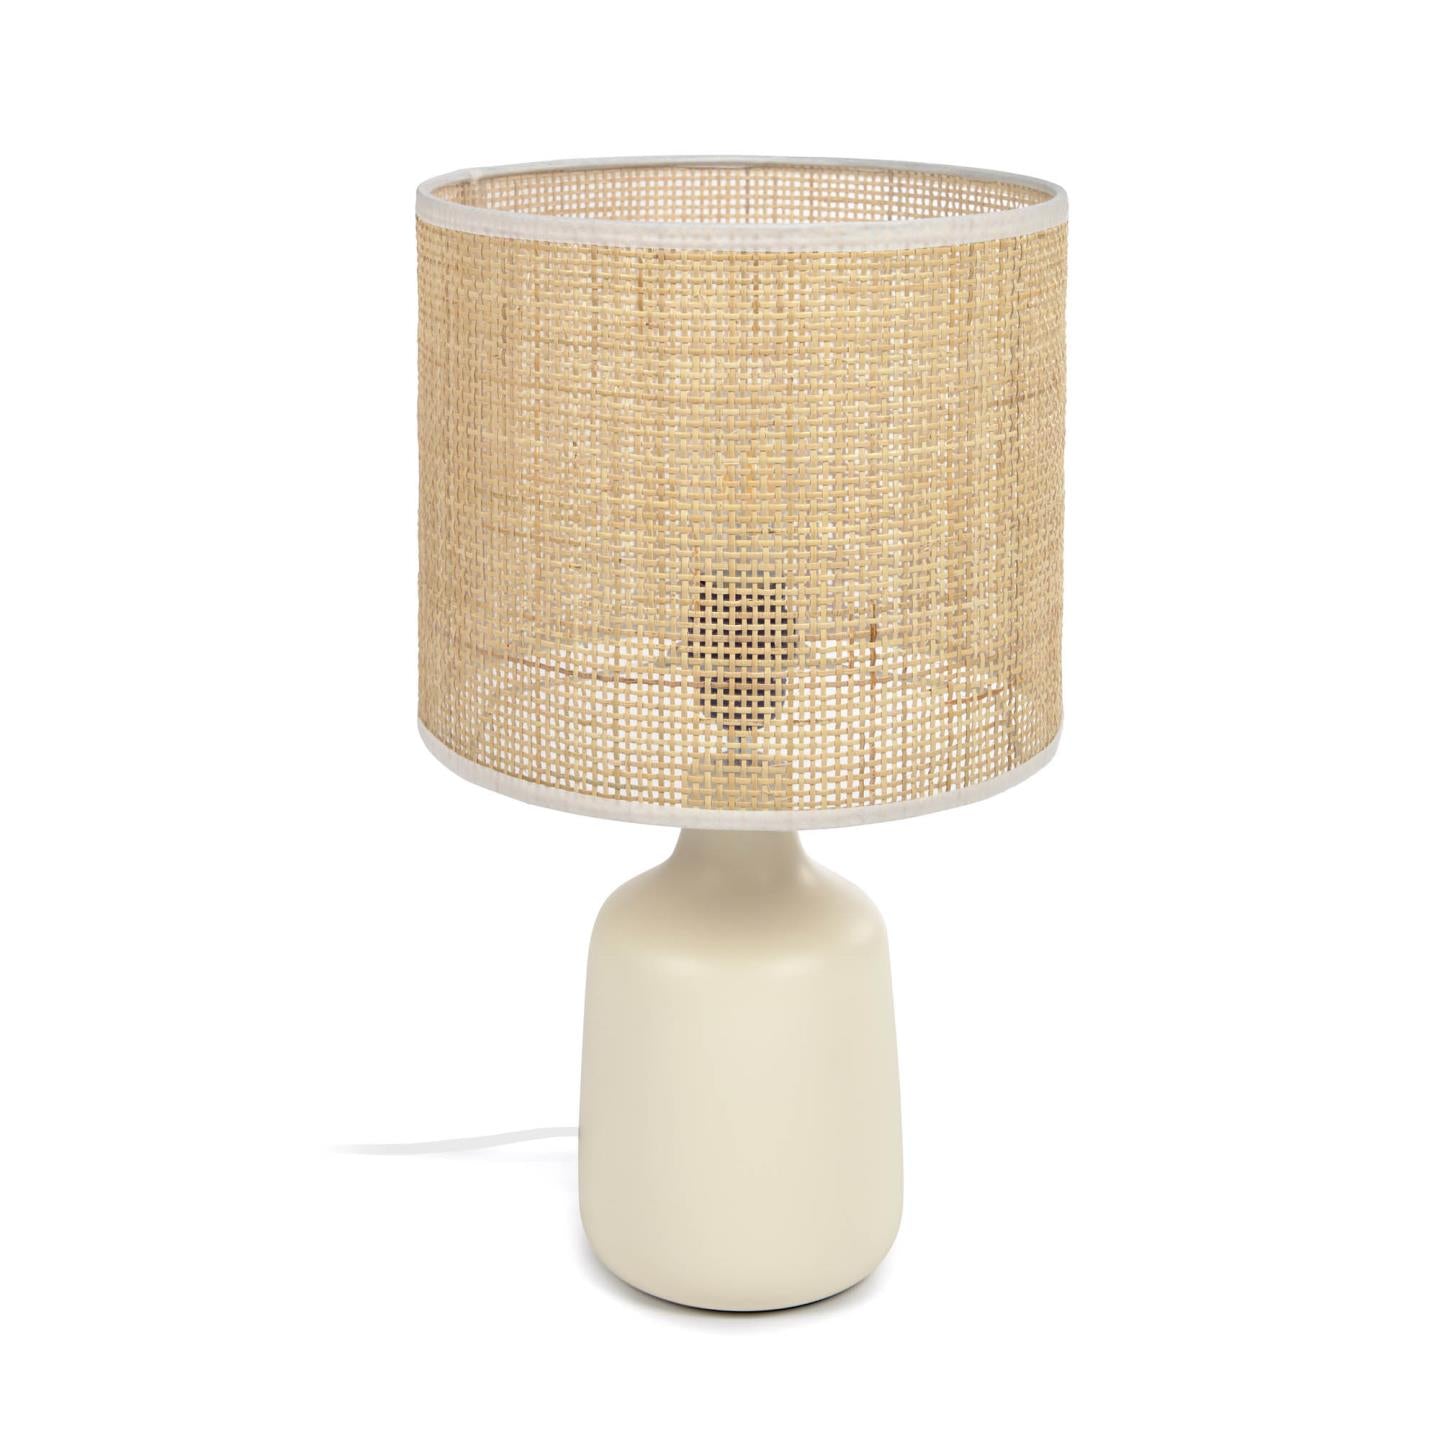 Erna table lamp in white ceramic and bamboo with natural finish